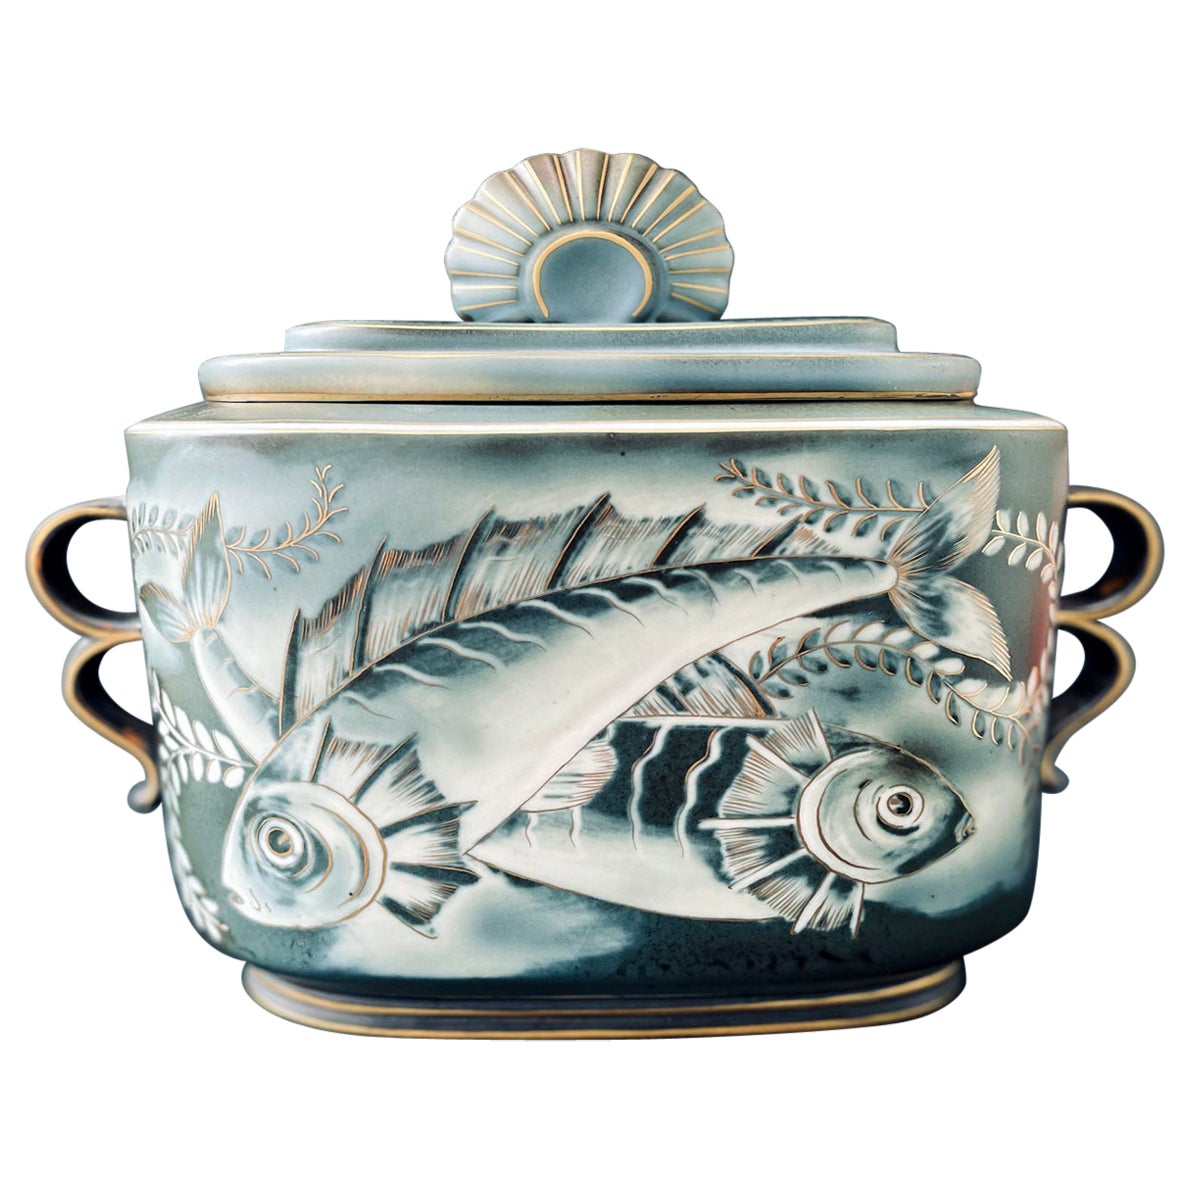 "Perch & Angelfish, " Unique, Ambitious Art Deco Covered Urn by Nylund, Rorstrand